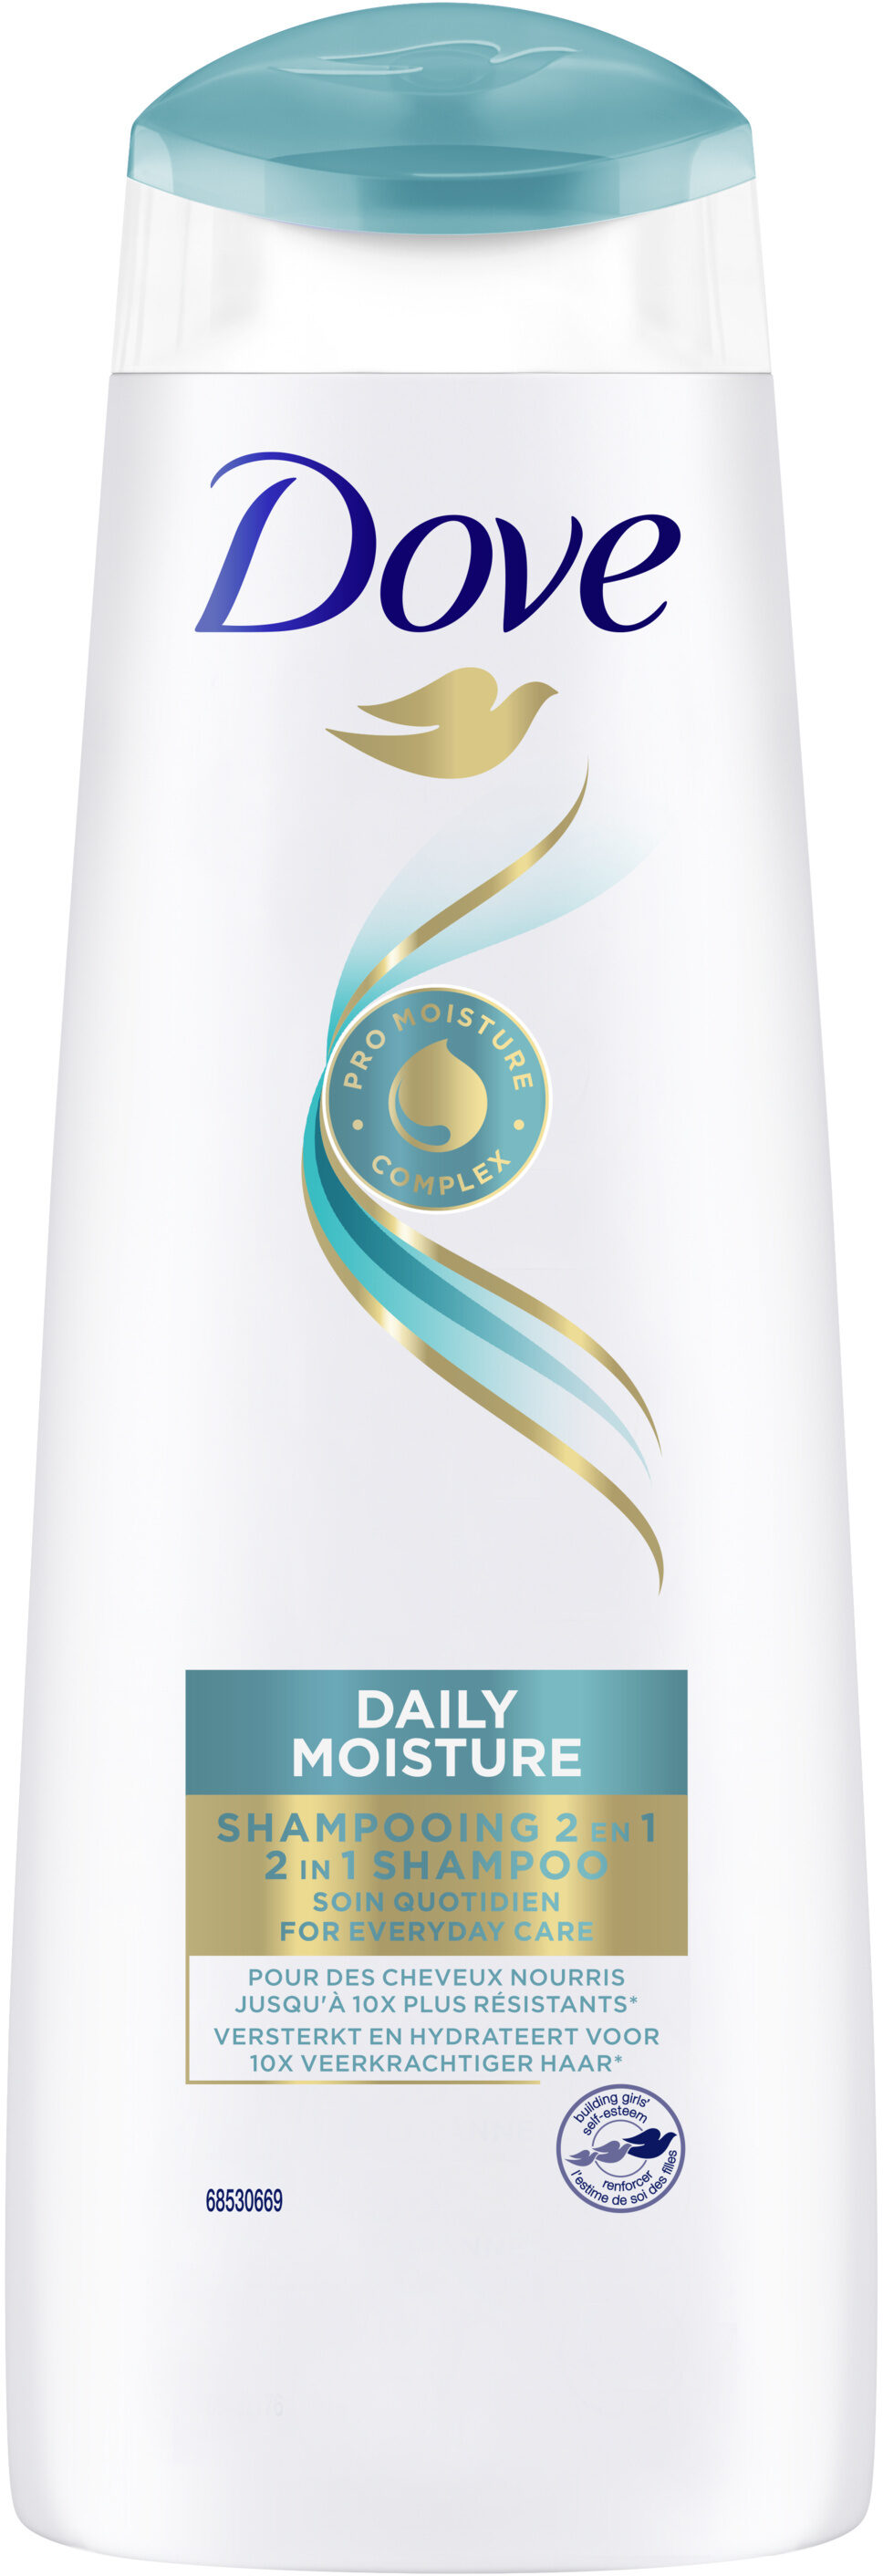 DOVE Shampoing Soin Quotidien 2 en 1 250ml - Product - fr